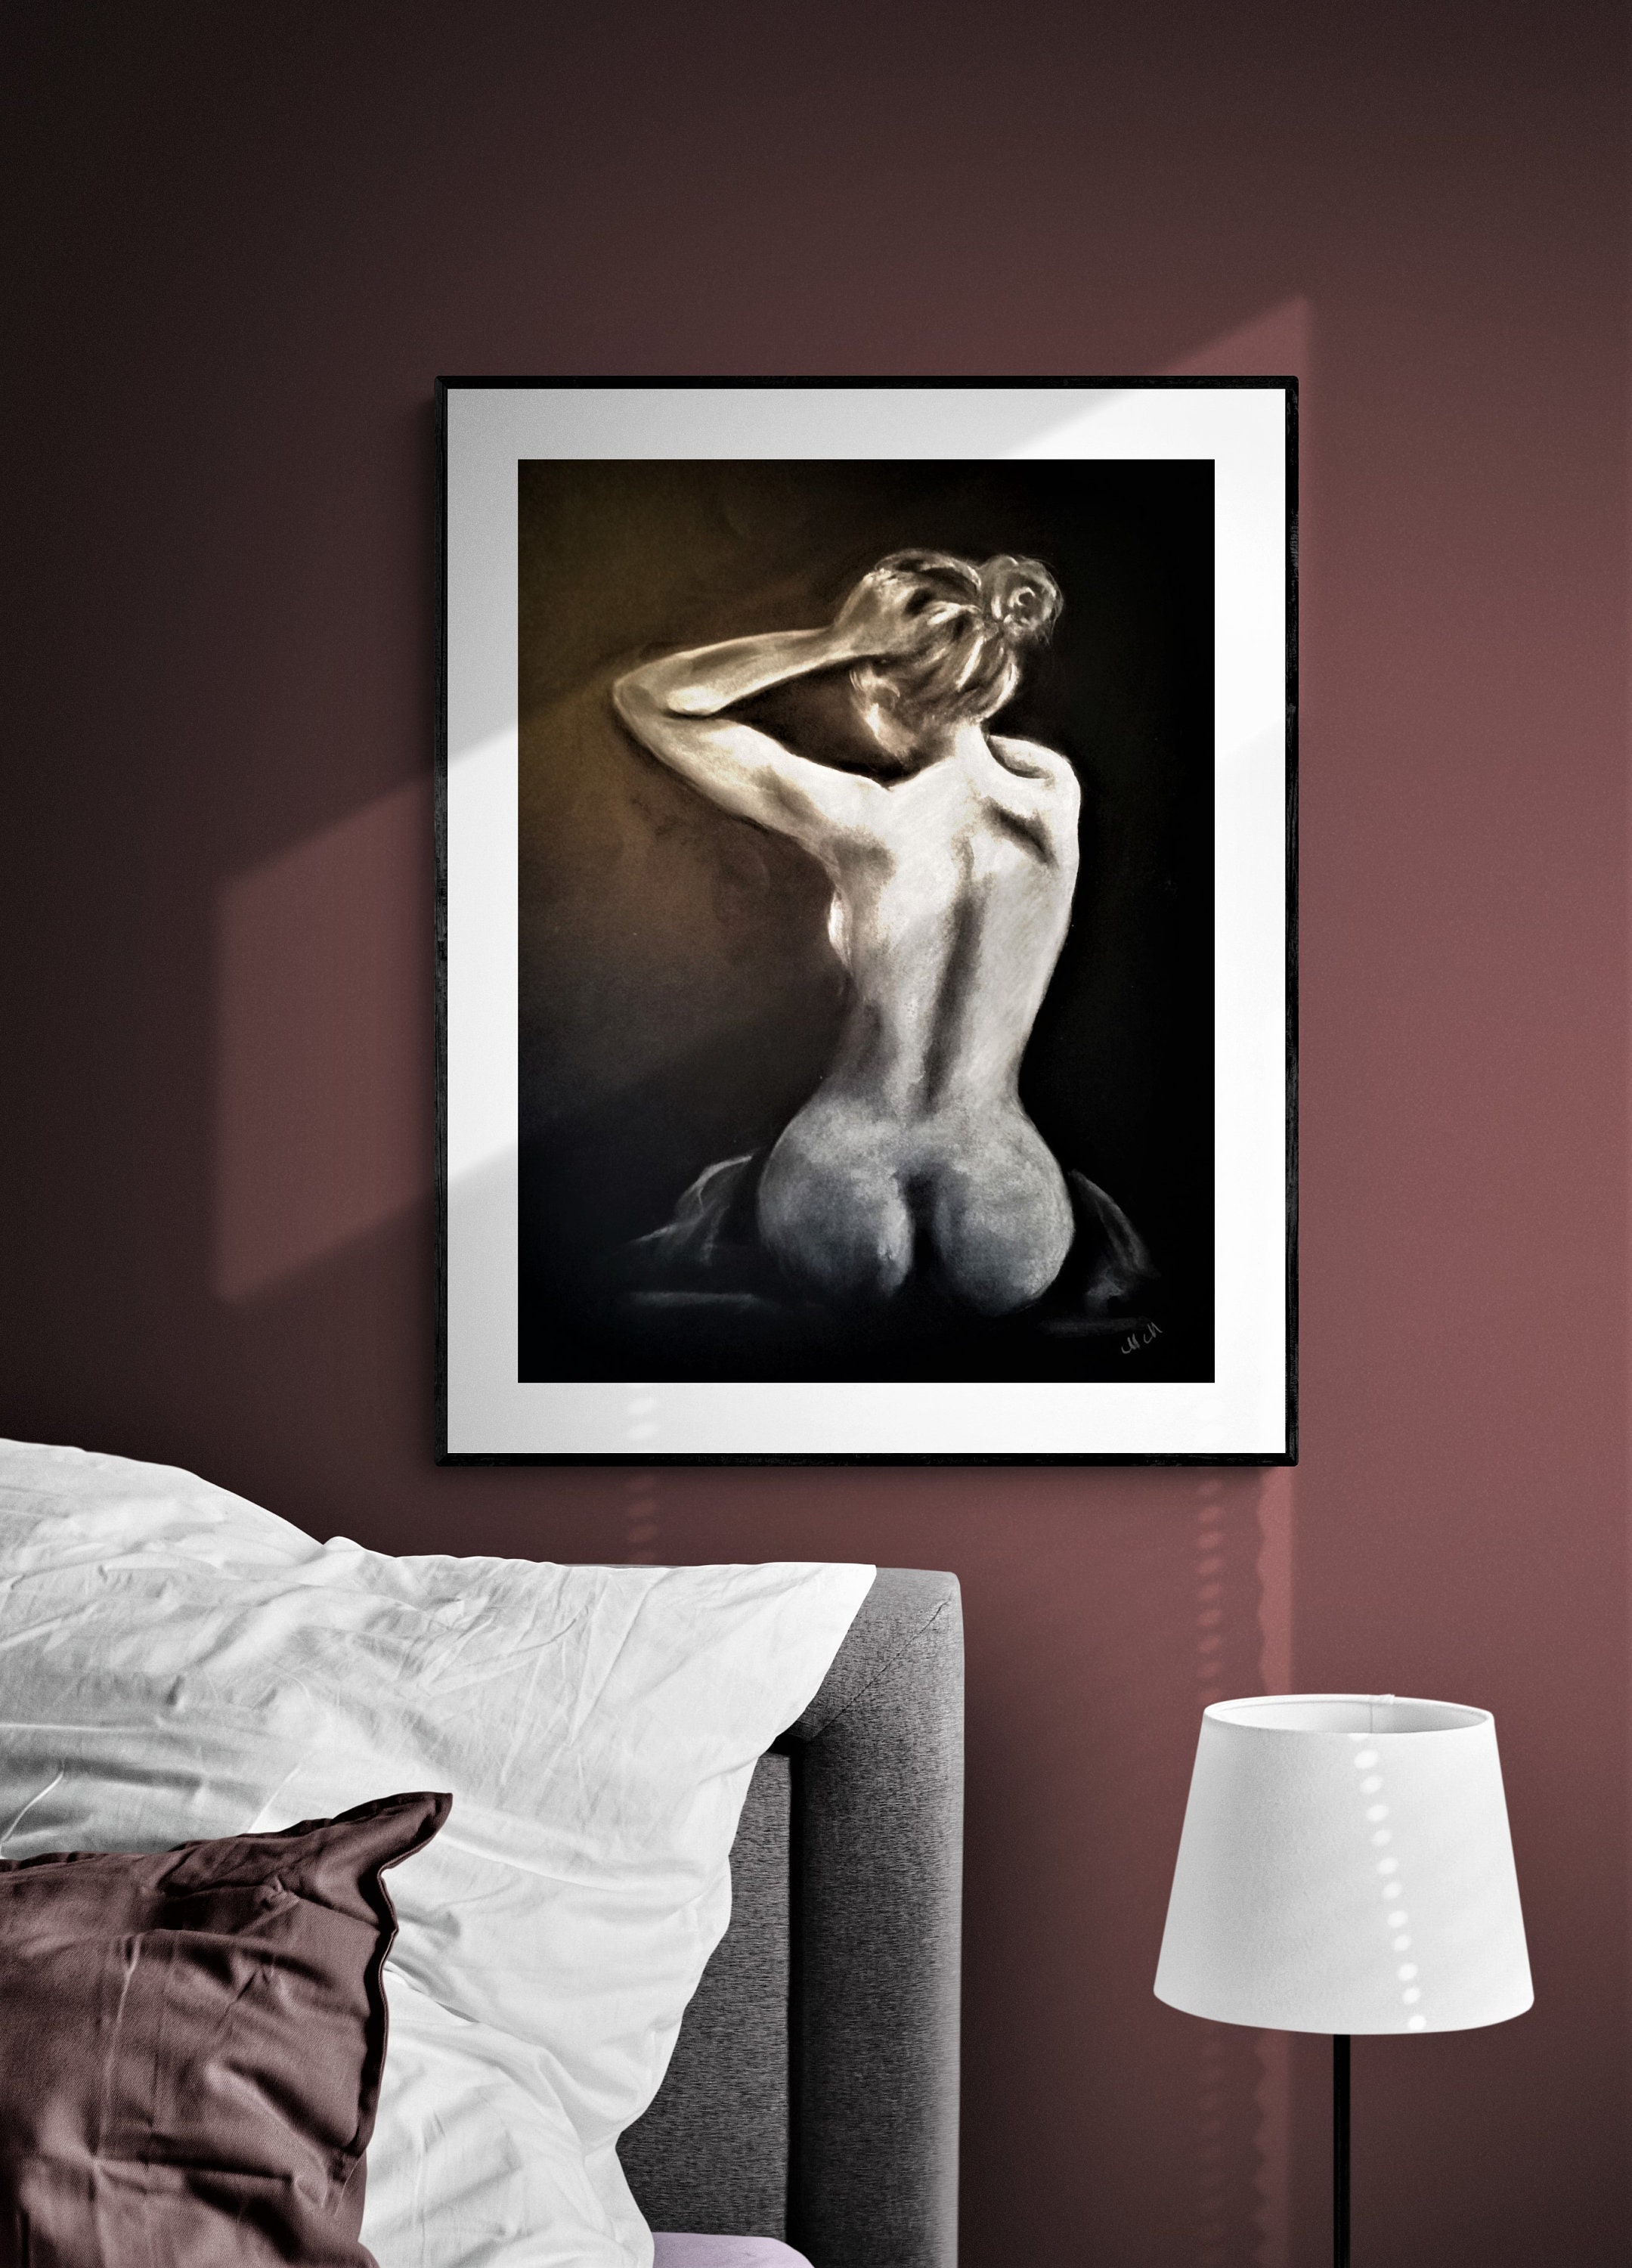 Naked Female Body Art Black and White Erotic Painting pic pic